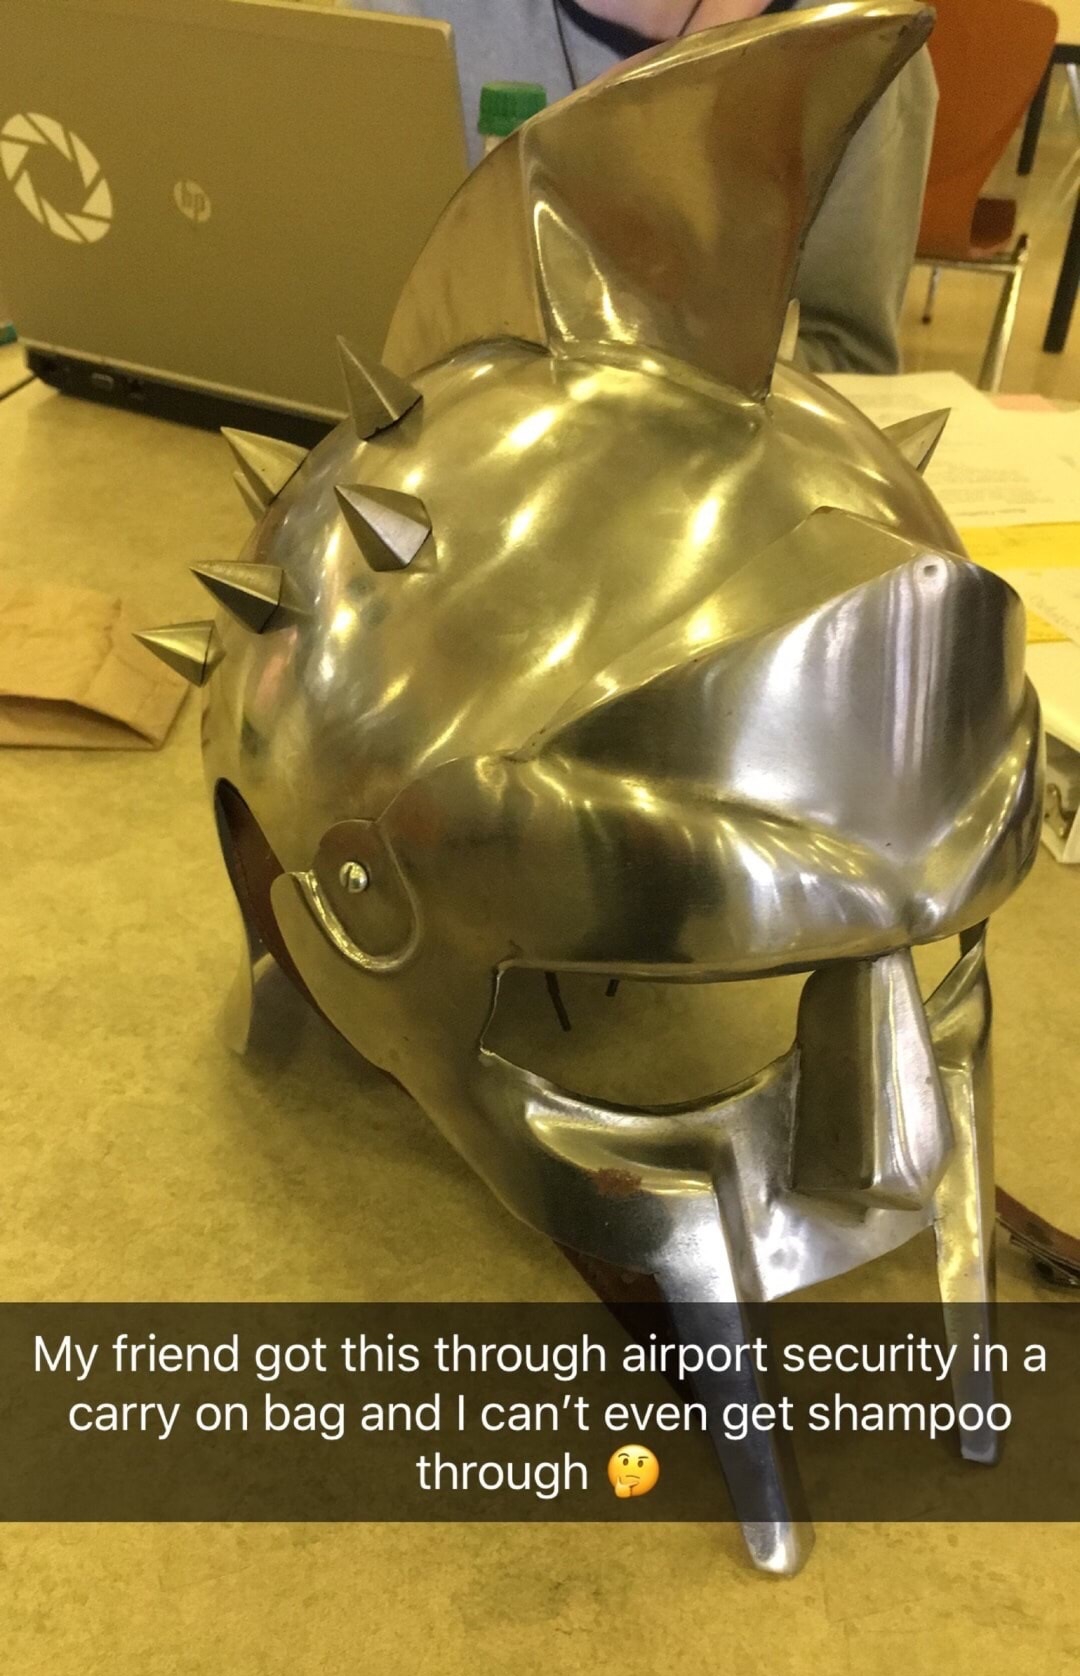 brass - My friend got this through airport security in a carry on bag and I can't even get shampoo through